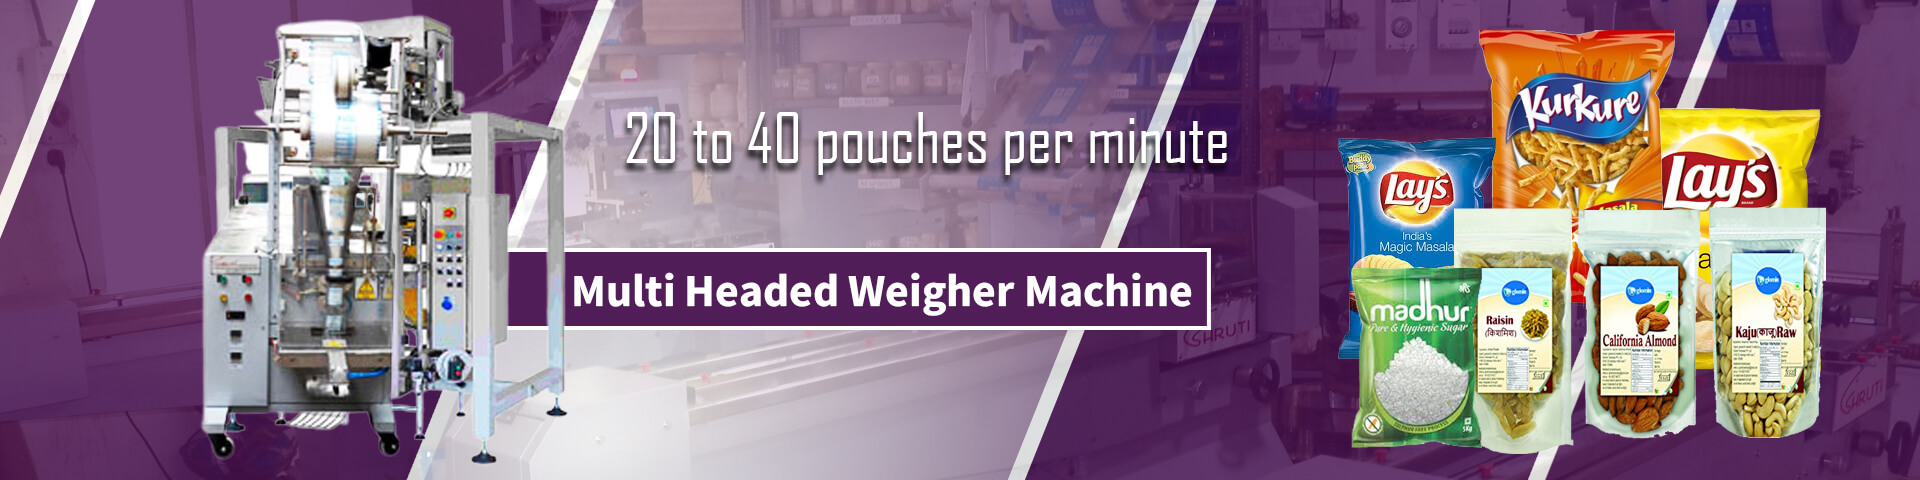 Multi Headed Weigher Machine for chips packing